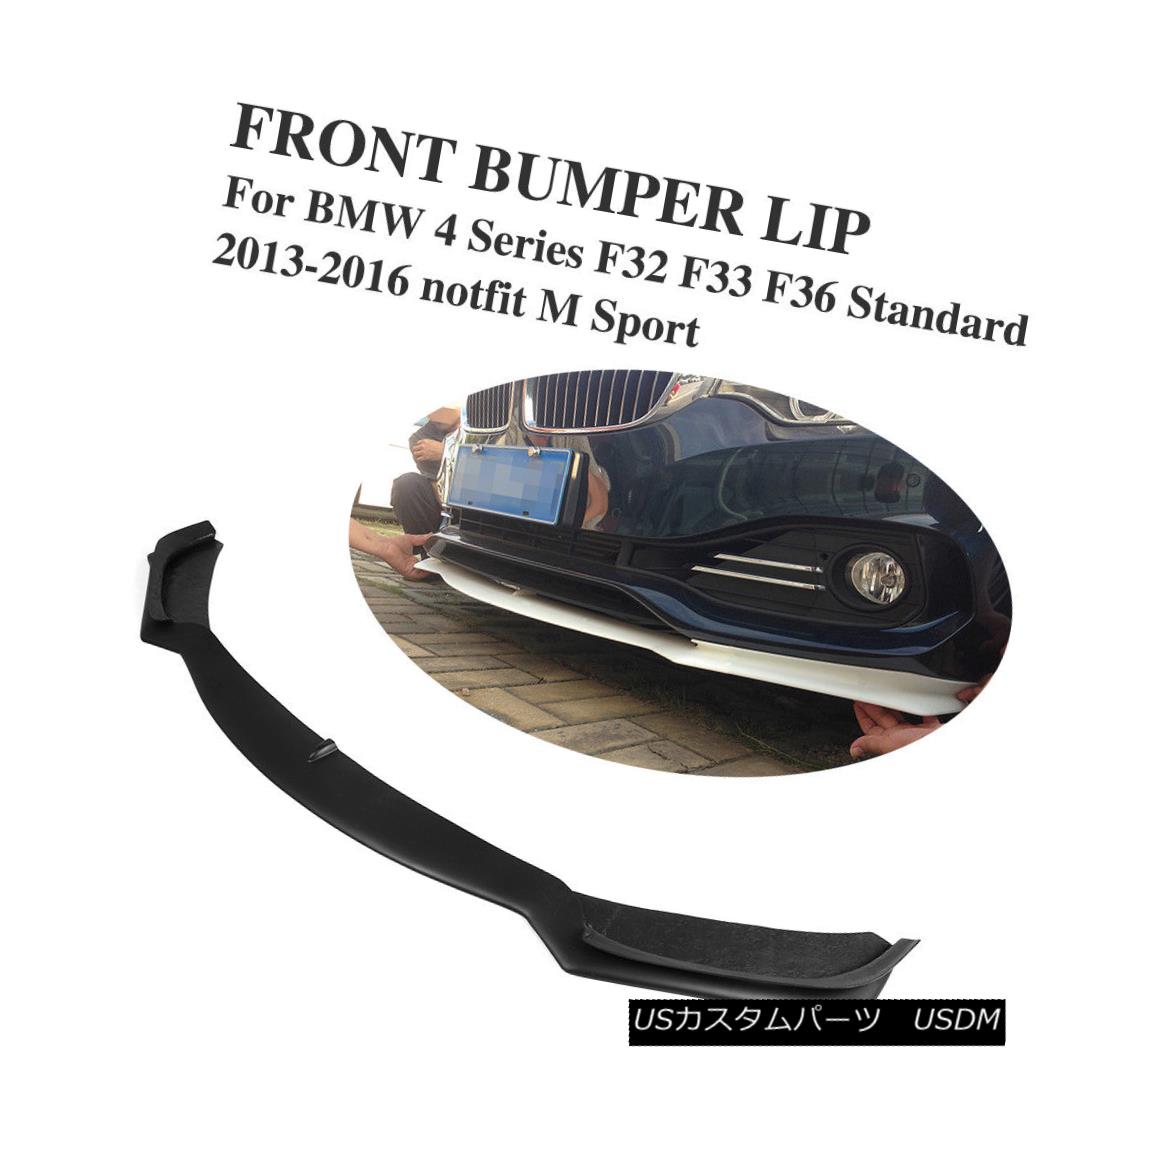 ѡ Black FRP Front Bumper Lip Spoiler for BMW 4Series F32 F33 F36 Standard 13-16 ֥åFRPեȥХѡåץݥ顼for BMW 4꡼F32 F33 F3613-16